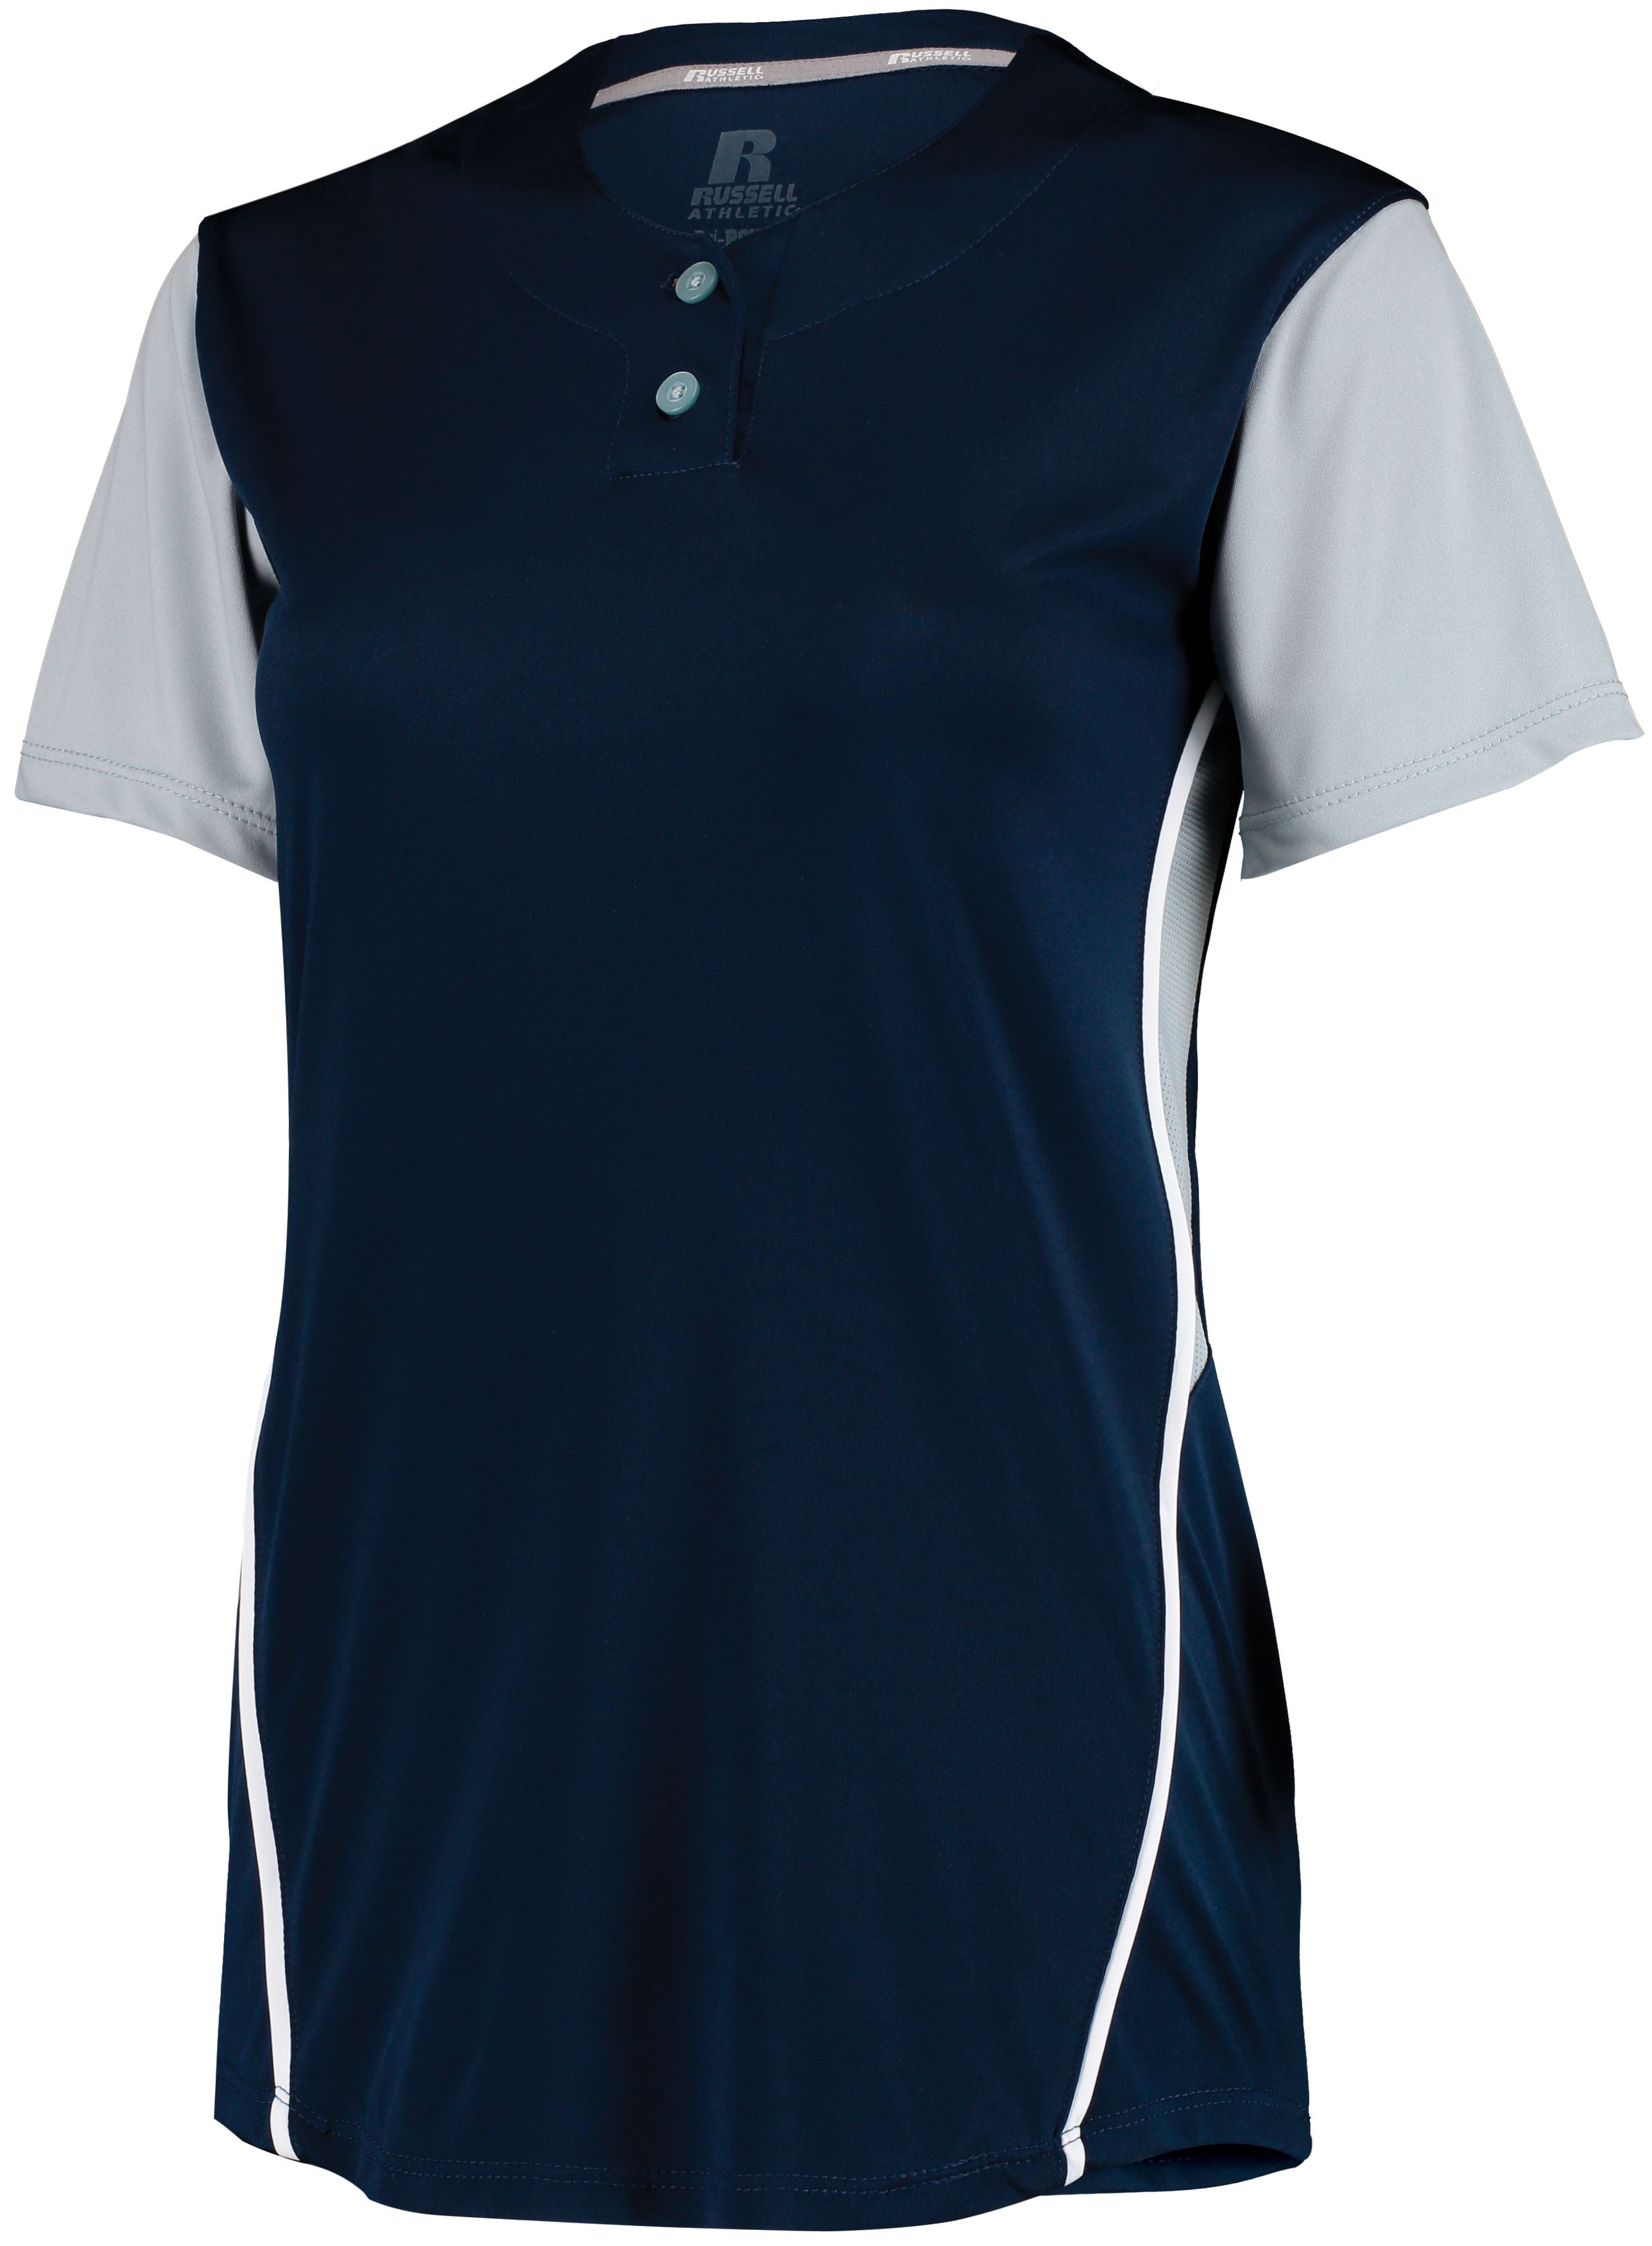 Russell Athletic Ladies Performance Two-Button Color Block Jersey in Navy/Baseball Grey  -Part of the Ladies, Ladies-Jersey, Softball, Russell-Athletic-Products, Shirts product lines at KanaleyCreations.com